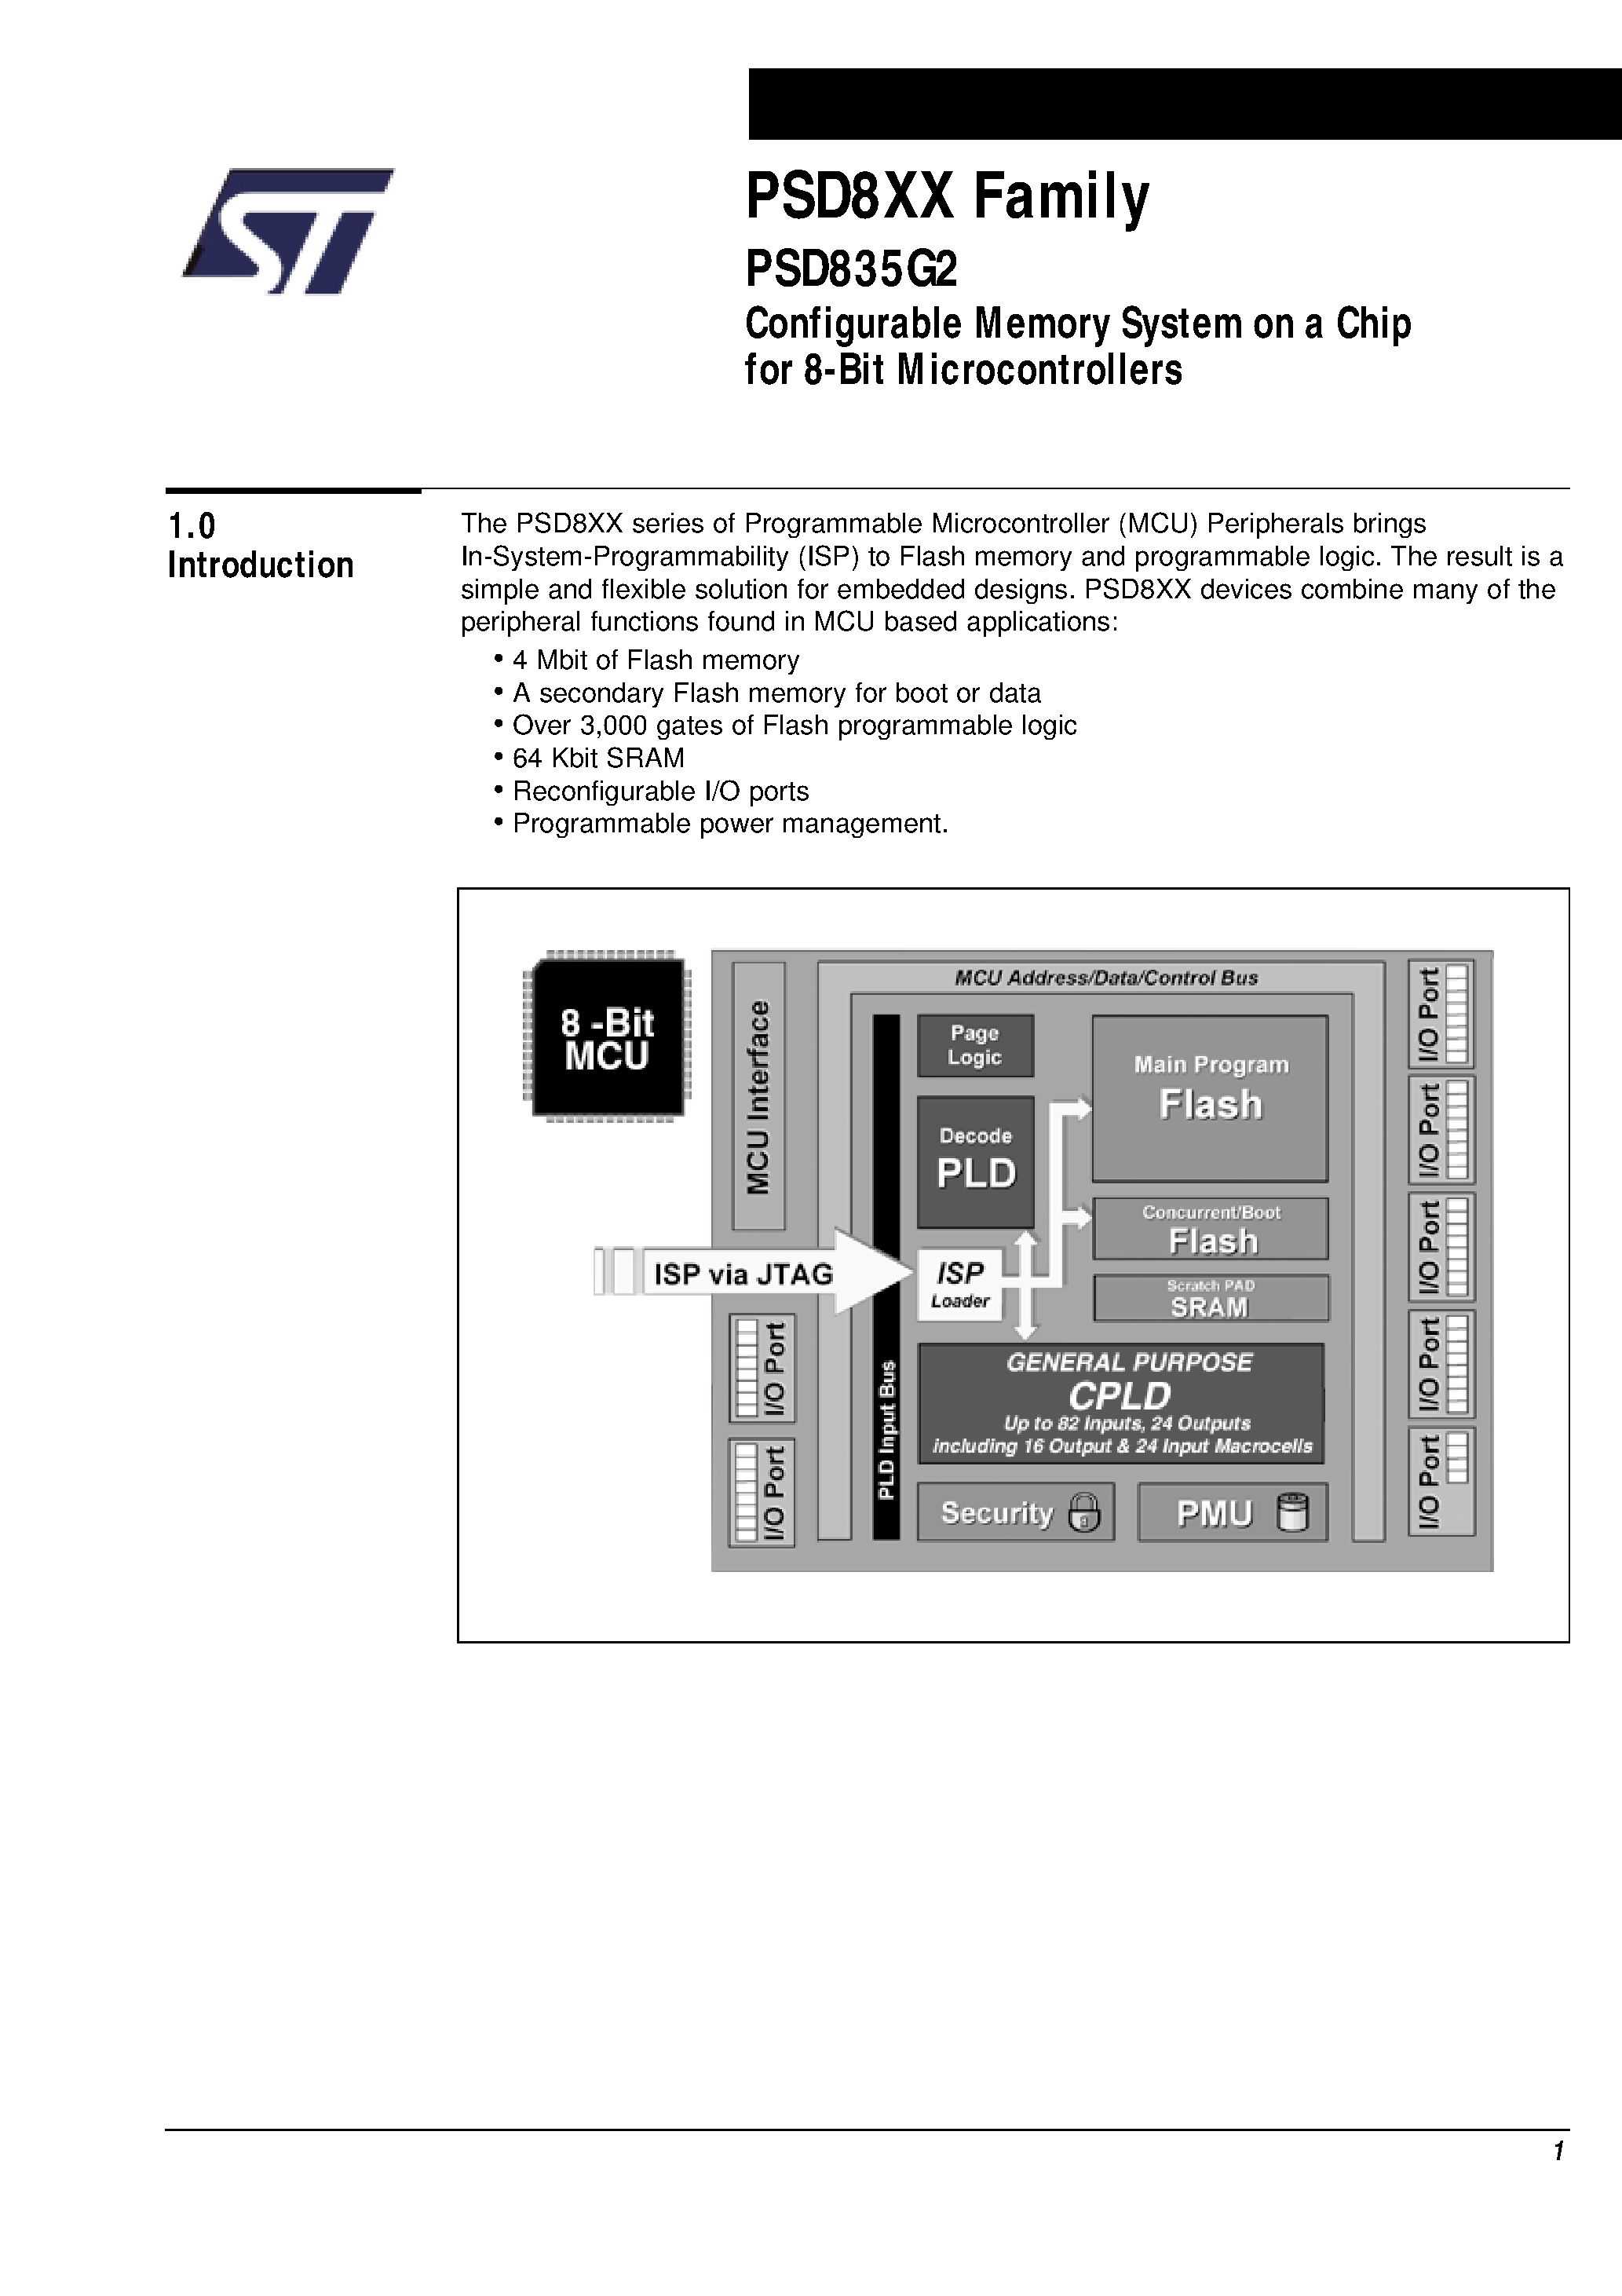 Datasheet PSD835F3-A-12JI - Configurable Memory System on a Chip for 8-Bit Microcontrollers page 2